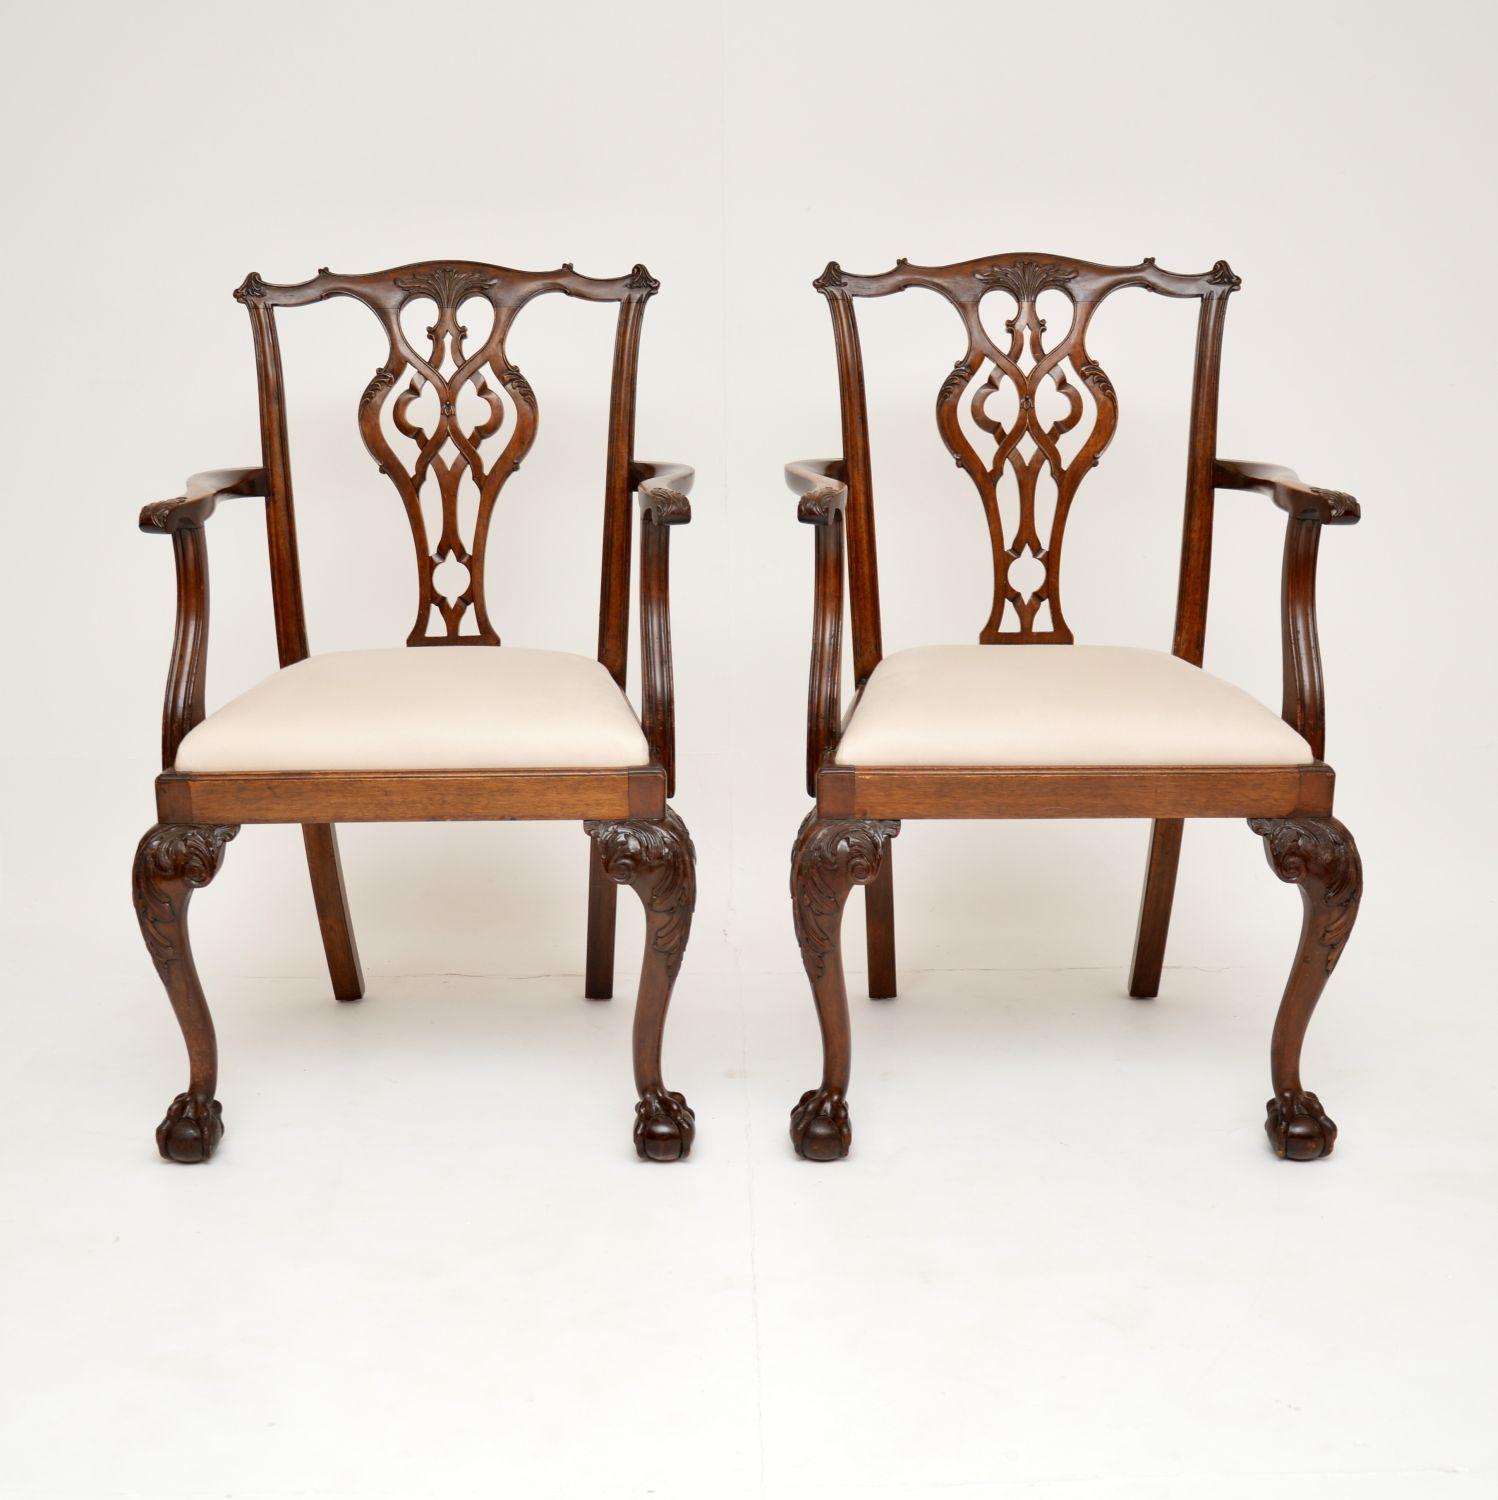 An excellent pair of antique carver chairs in the classic Chippendale style. They were made in England, and date from around the 1890-1910 period.

The quality is superb, they have very well built solid wooden frames. The cabriole legs terminate in